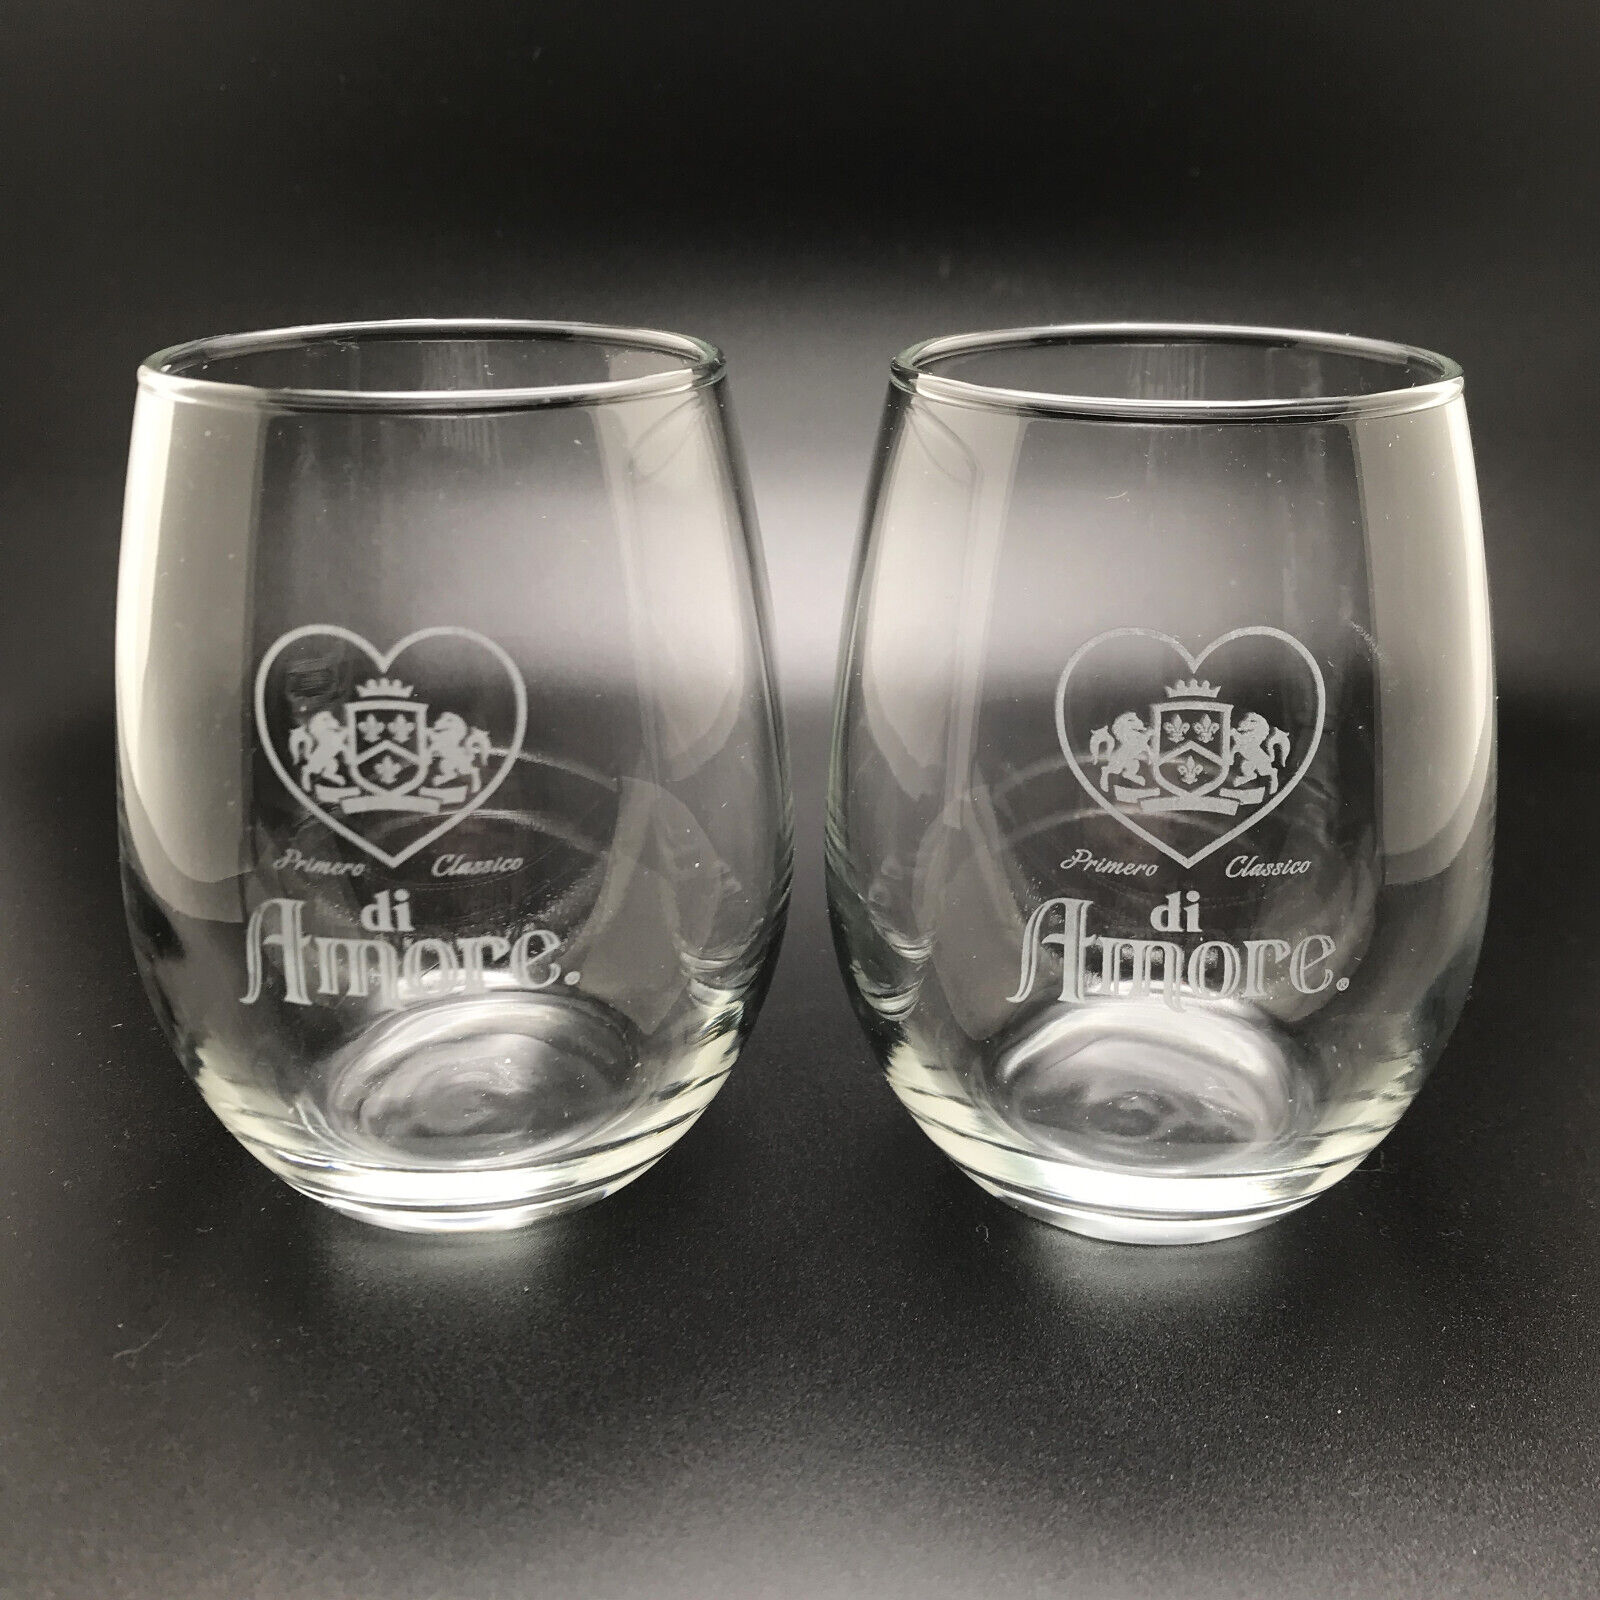 Vtg di Amore Cordial Glasses Lot of 2 Tumblers Etched Heart Crest 70s Nice Gift